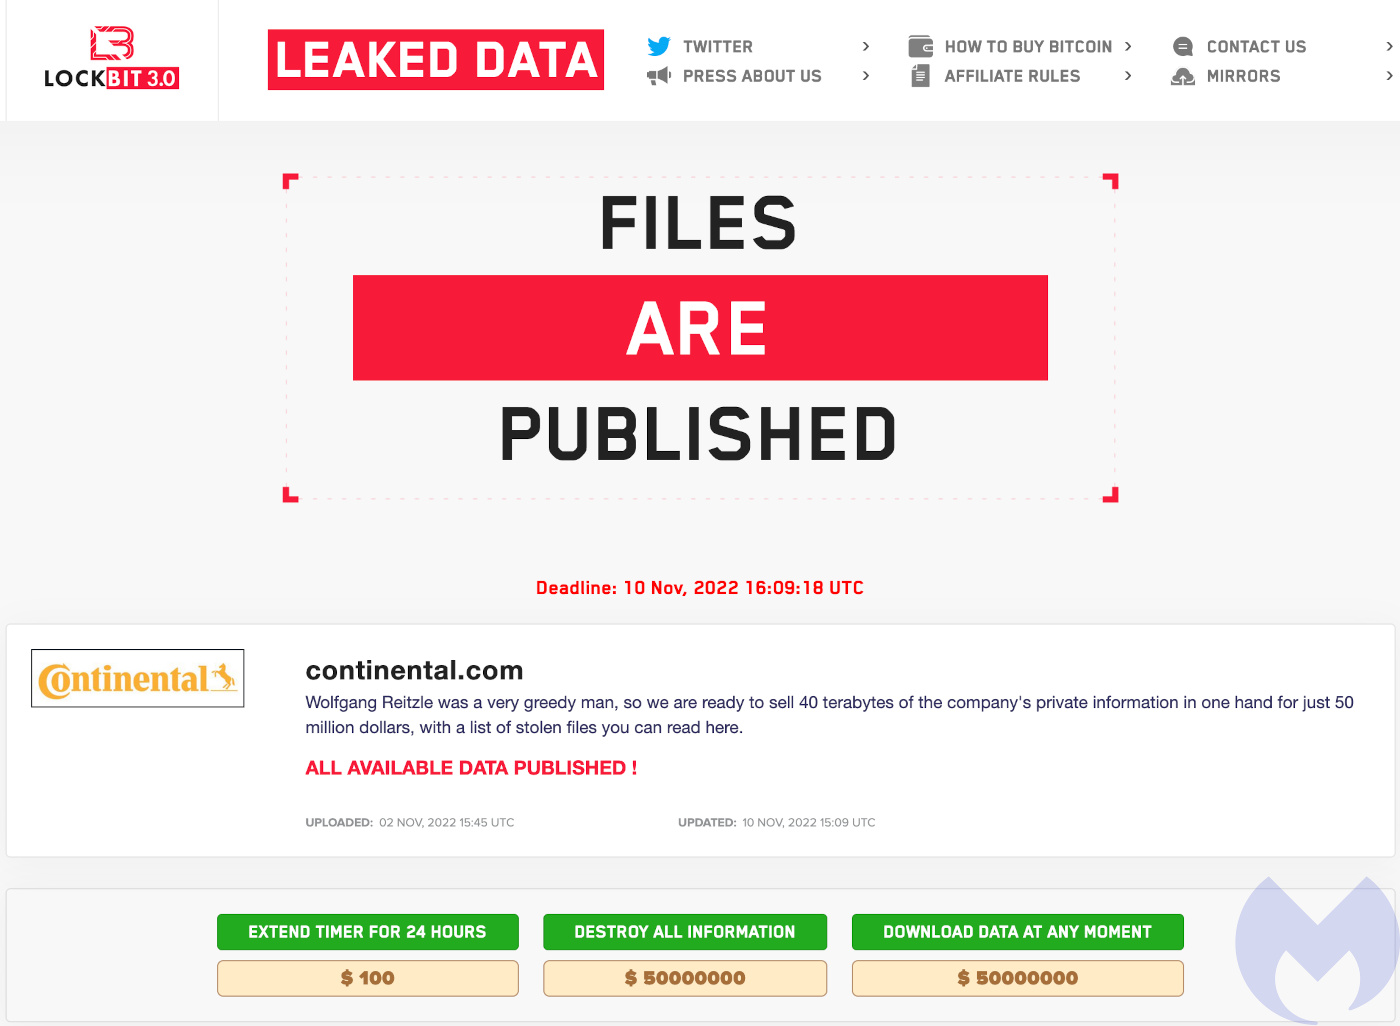 Stolen Continental data available for sale or destruction